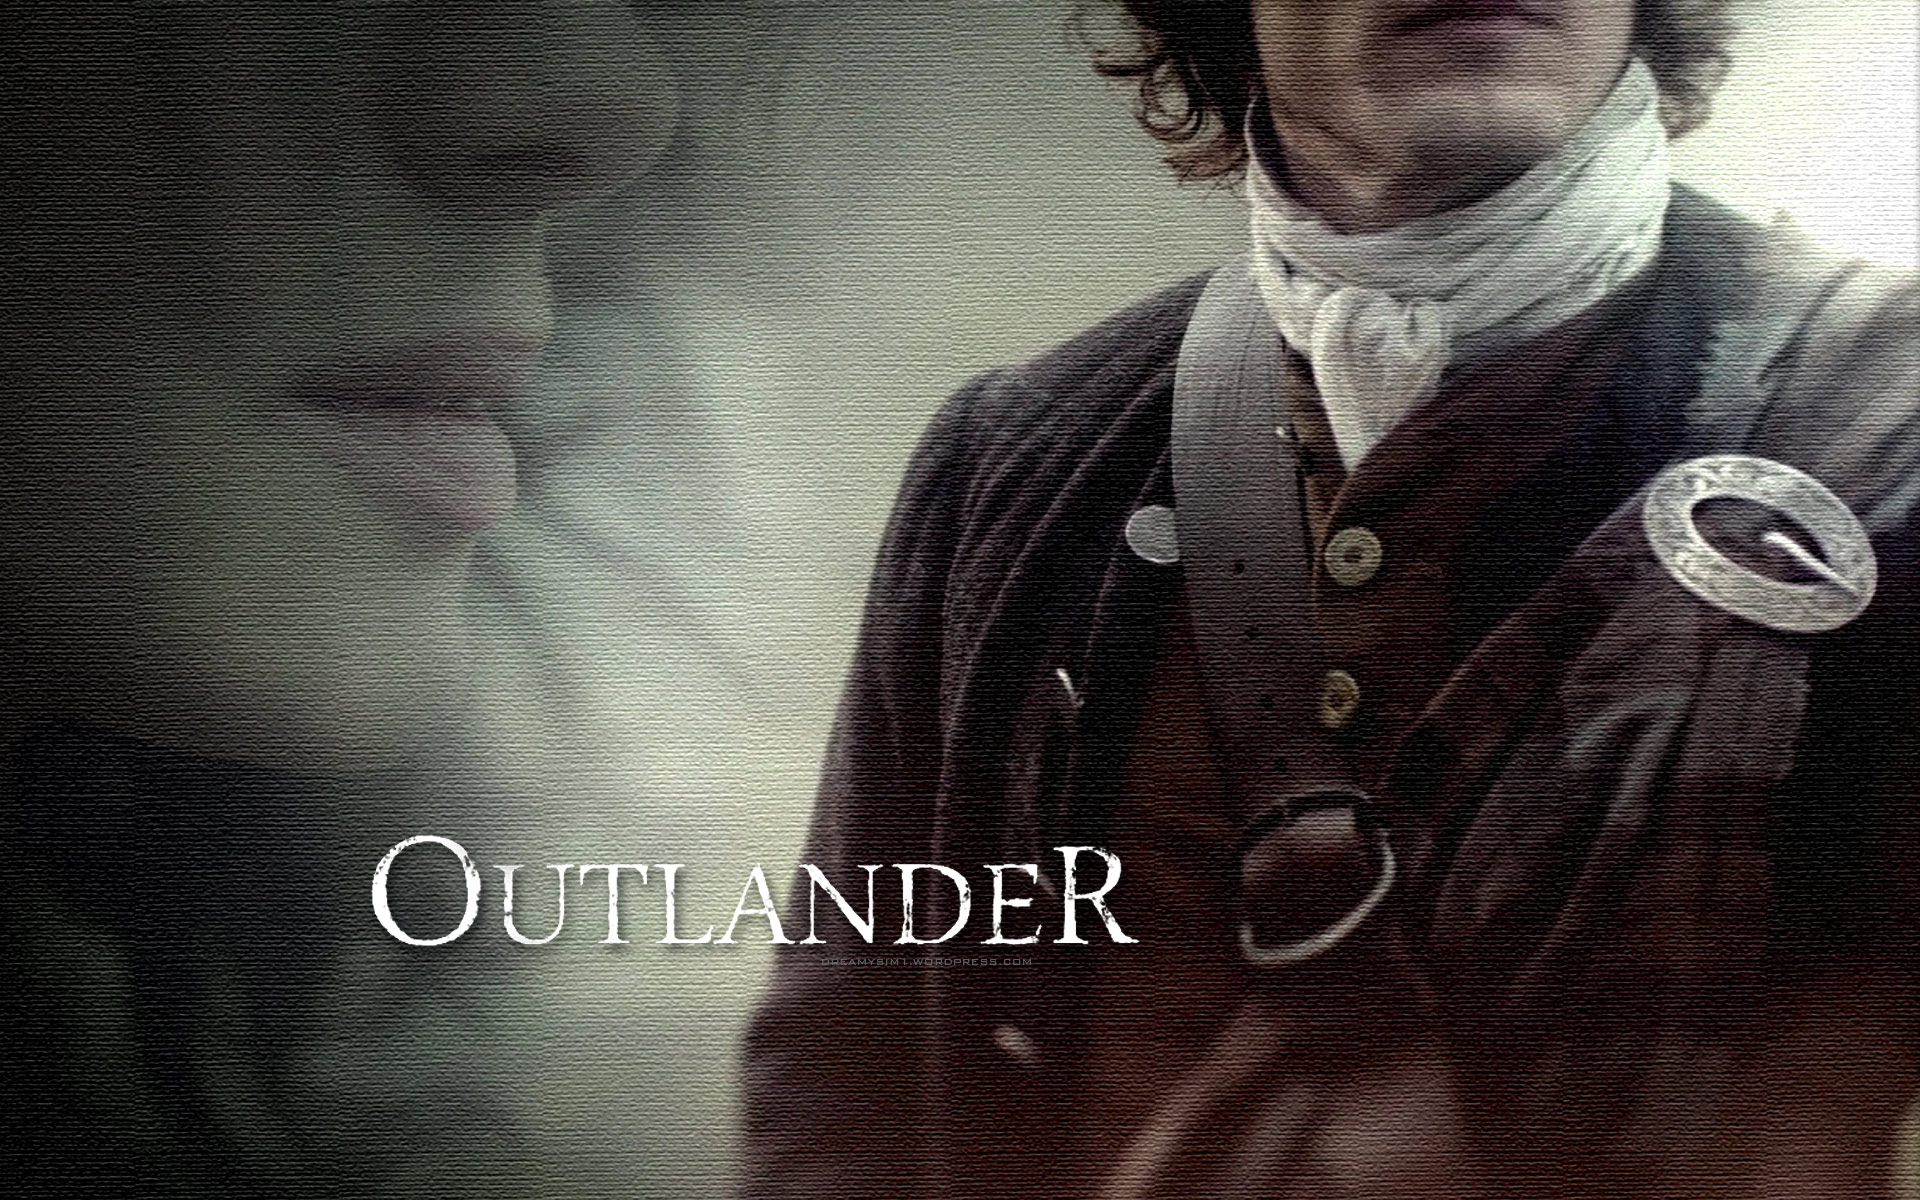 5 Gorgeous Outlander Wallpapers Made By Dreamysim1 HD Wallpapers Download Free Map Images Wallpaper [wallpaper376.blogspot.com]